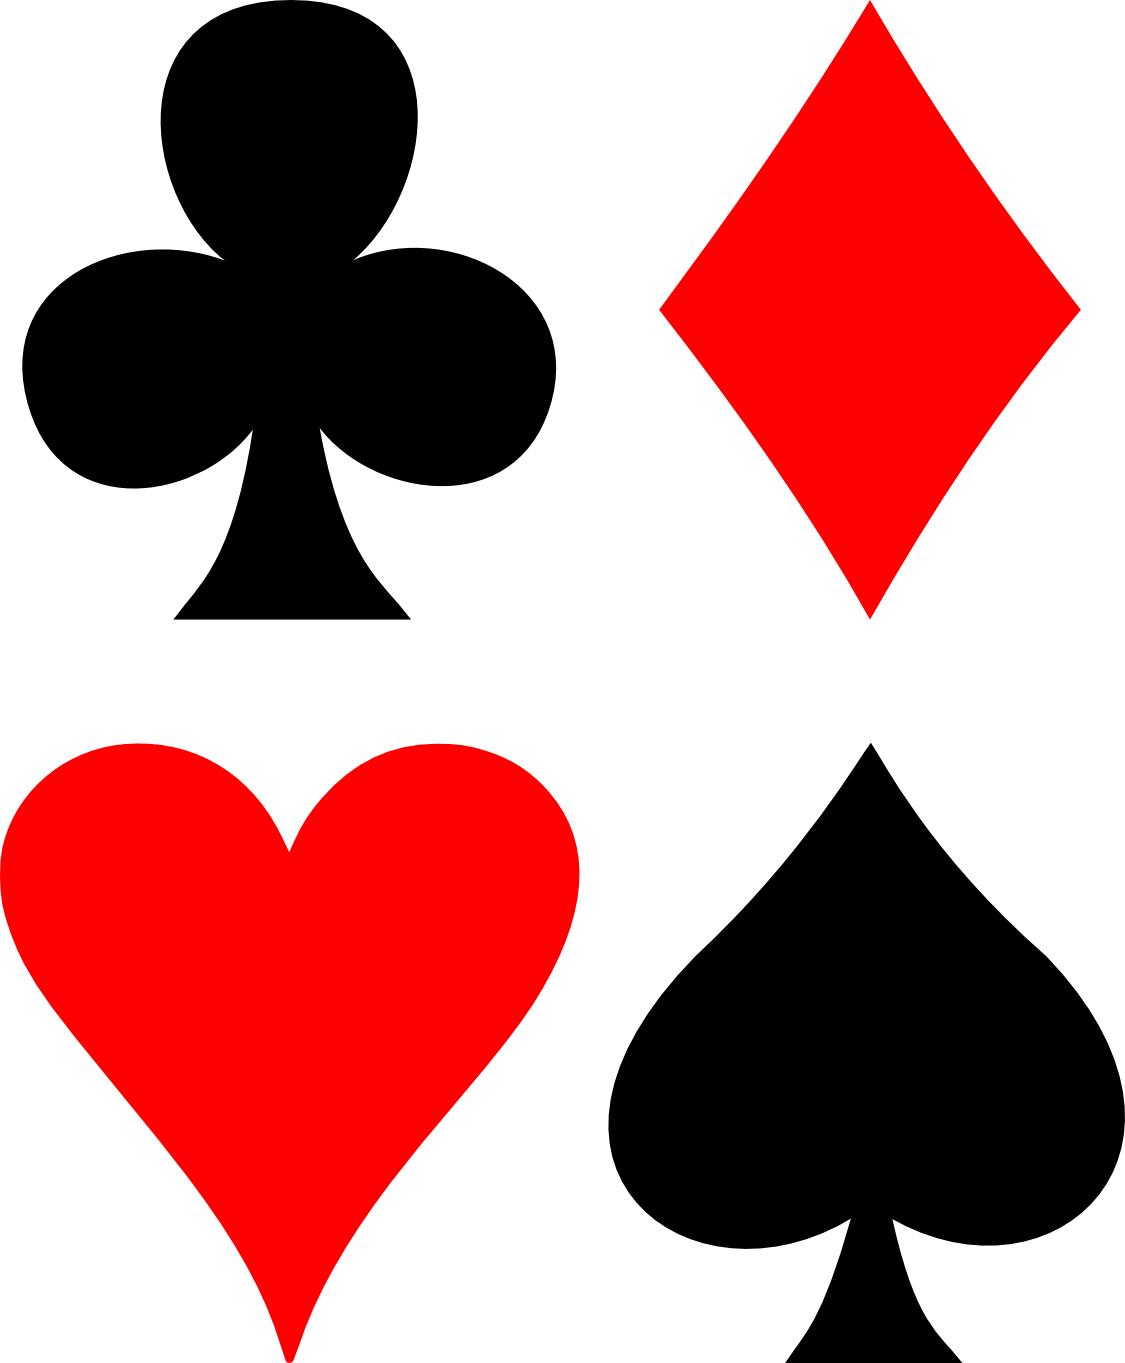 Playing Card Suit Symbols PNG Image